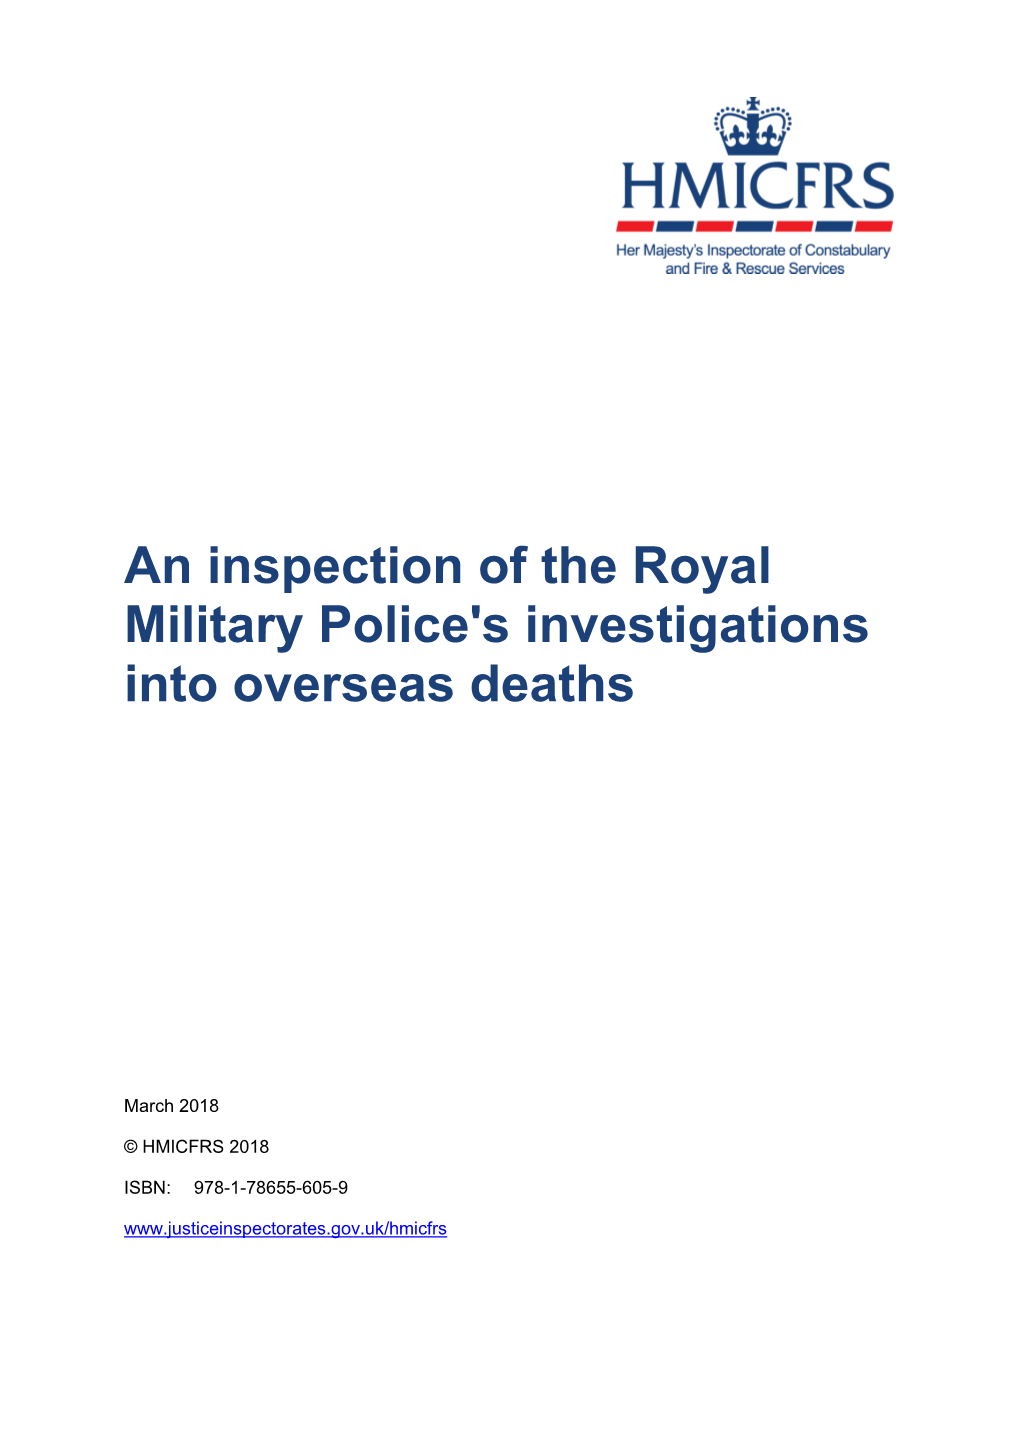 An Inspection of the Royal Military Police's Investigations Into Overseas Deaths